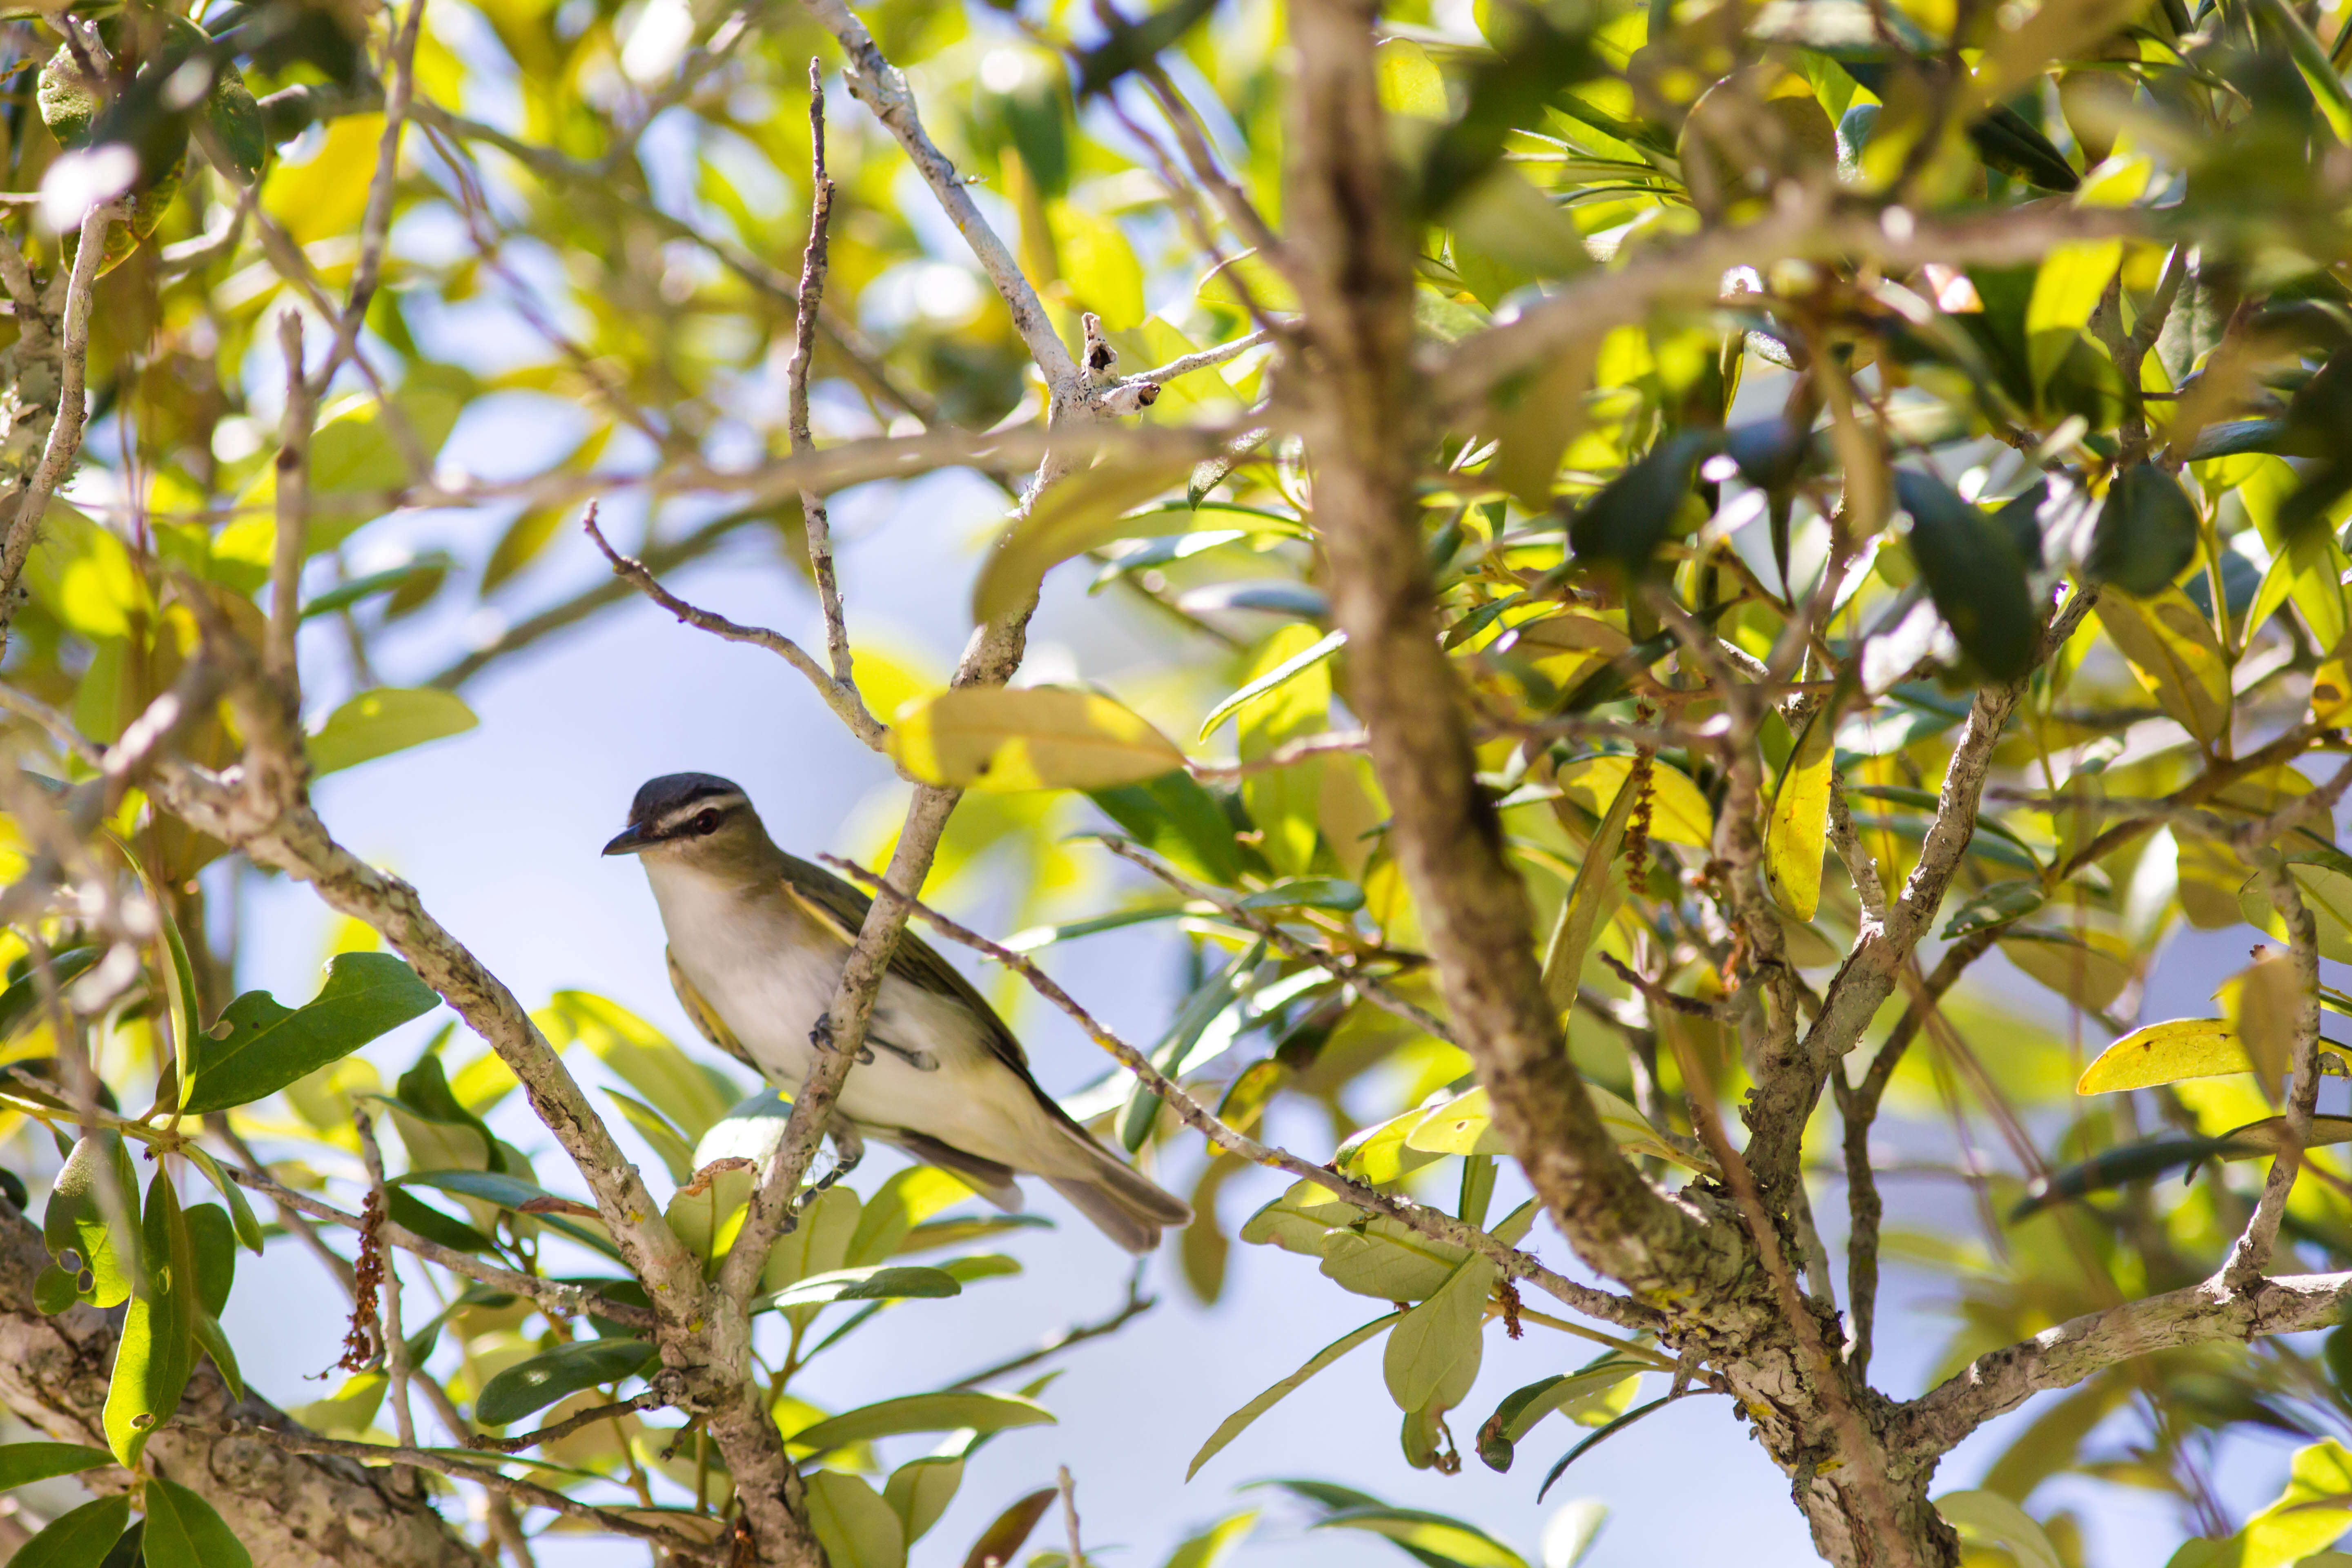 Image of Red-eyed Vireo